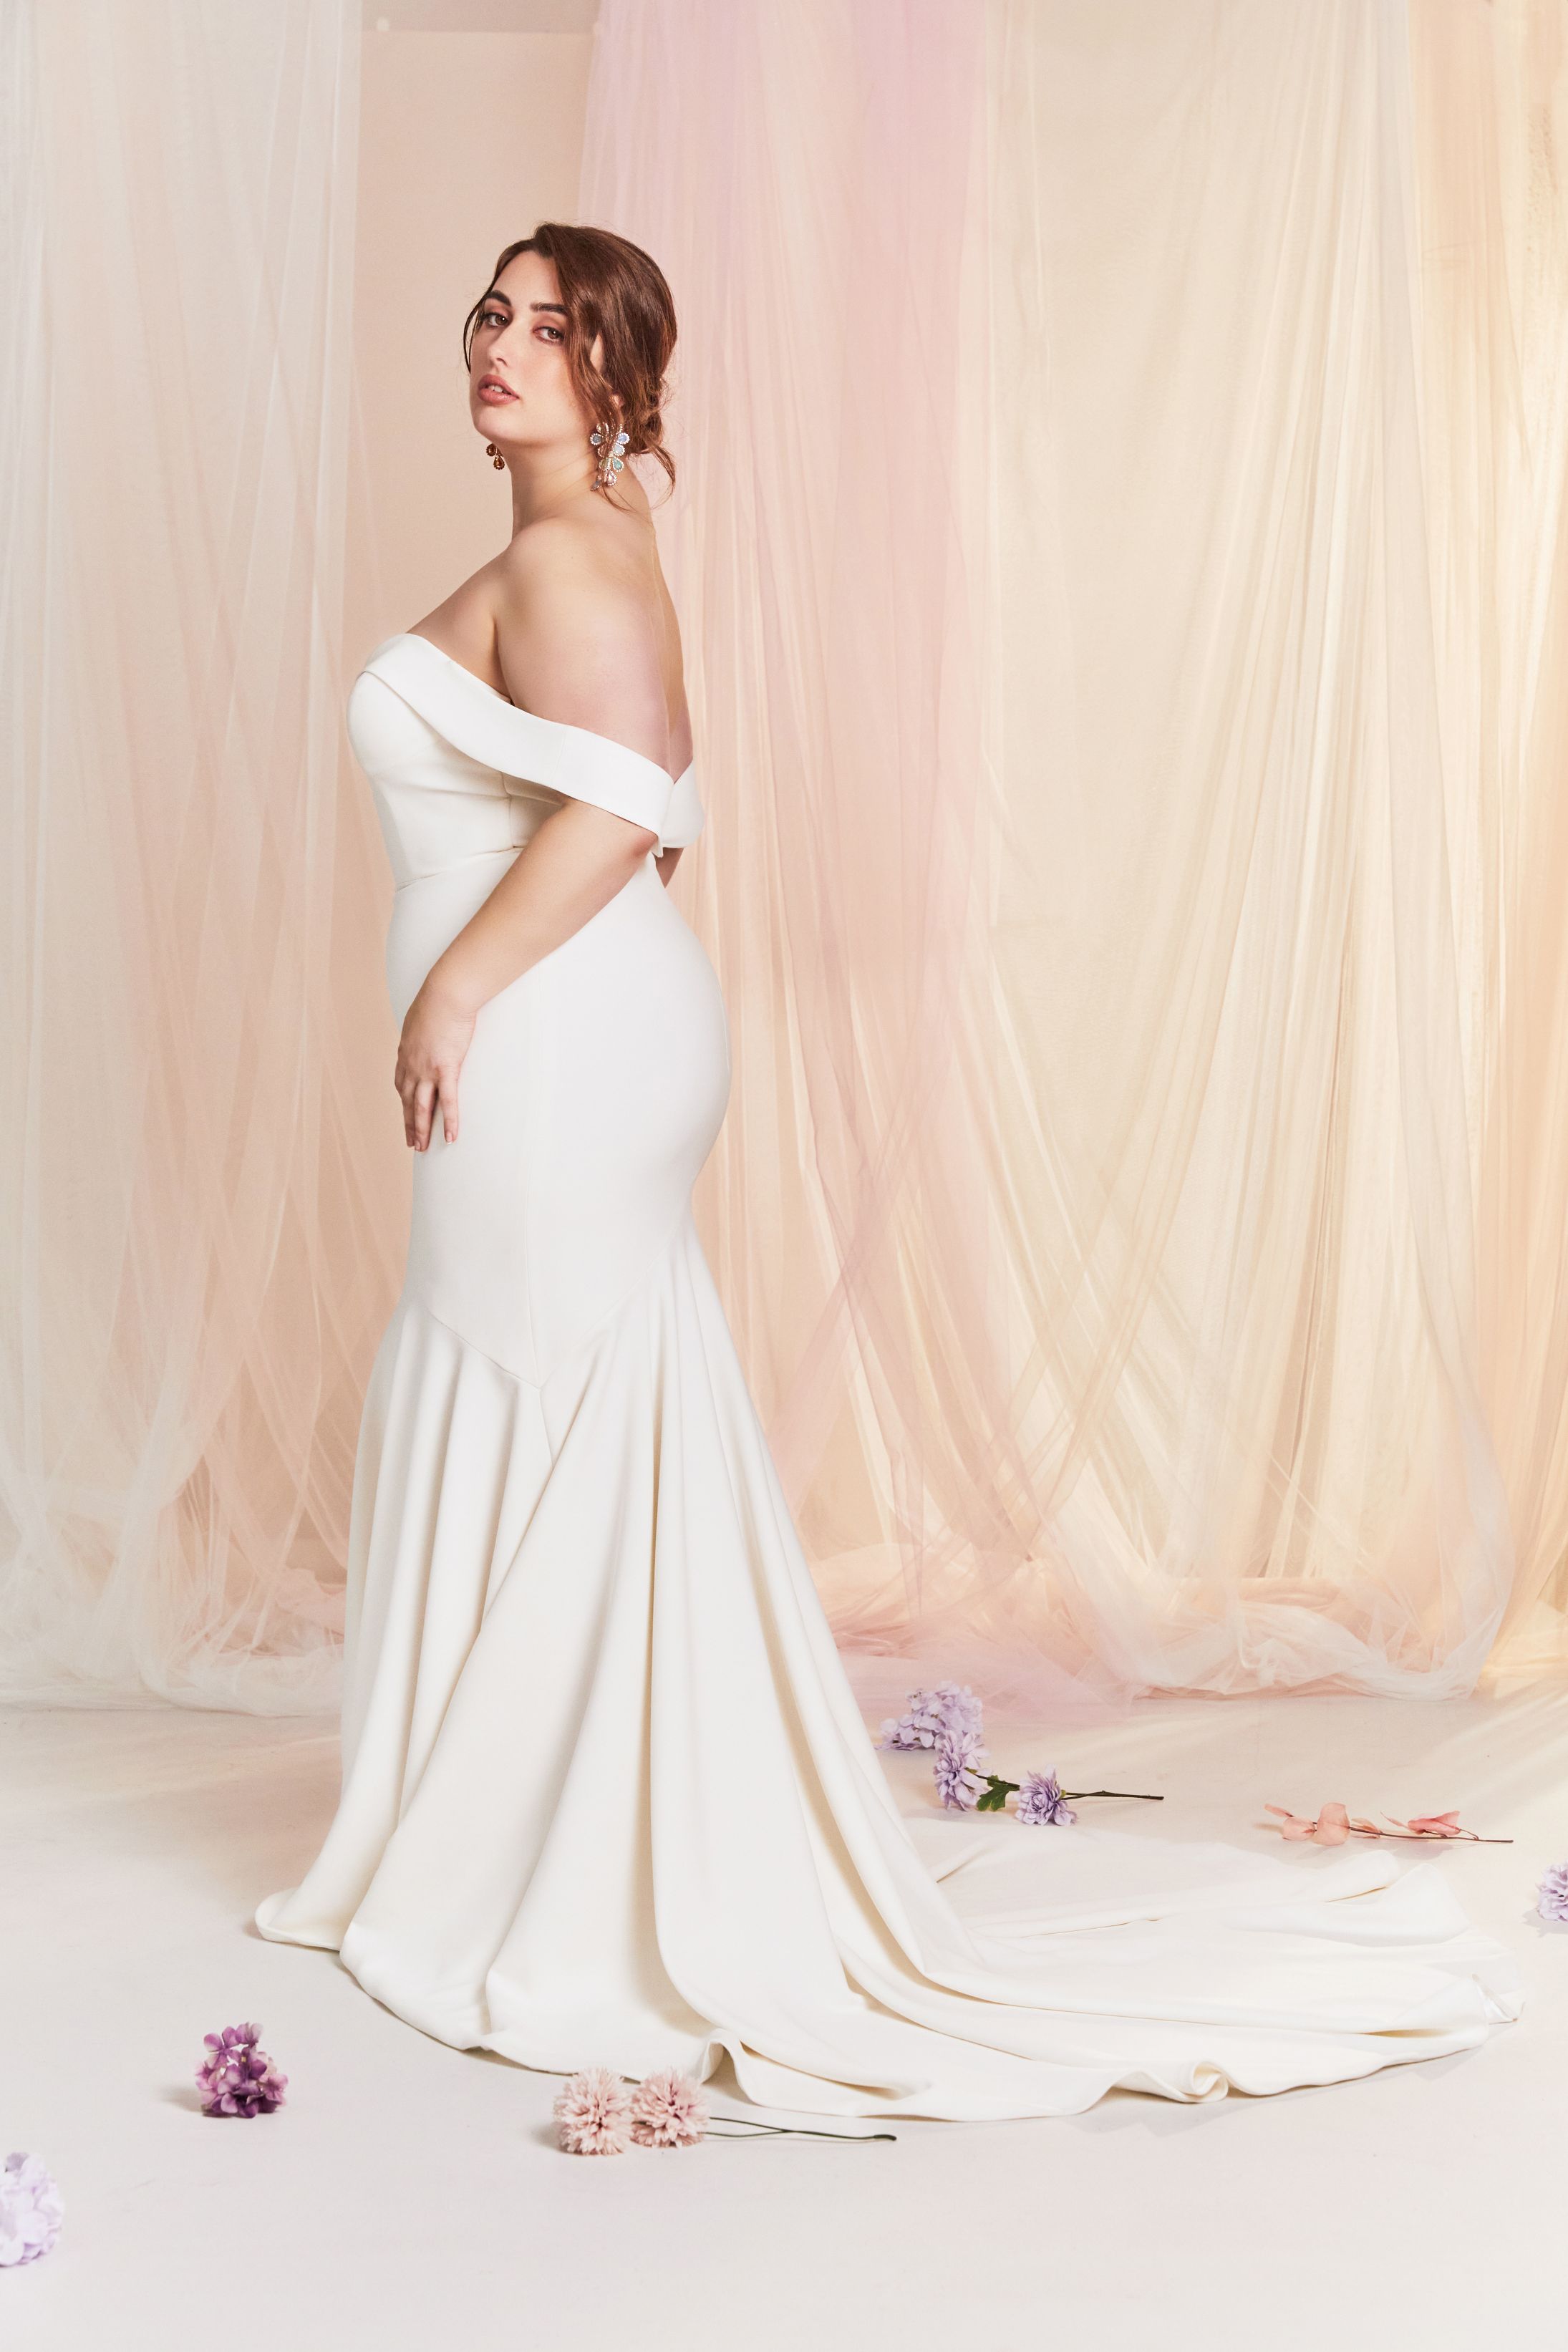 Mermaid cut wedding dress with sweetheart neckline and off-the-shoulder straps.